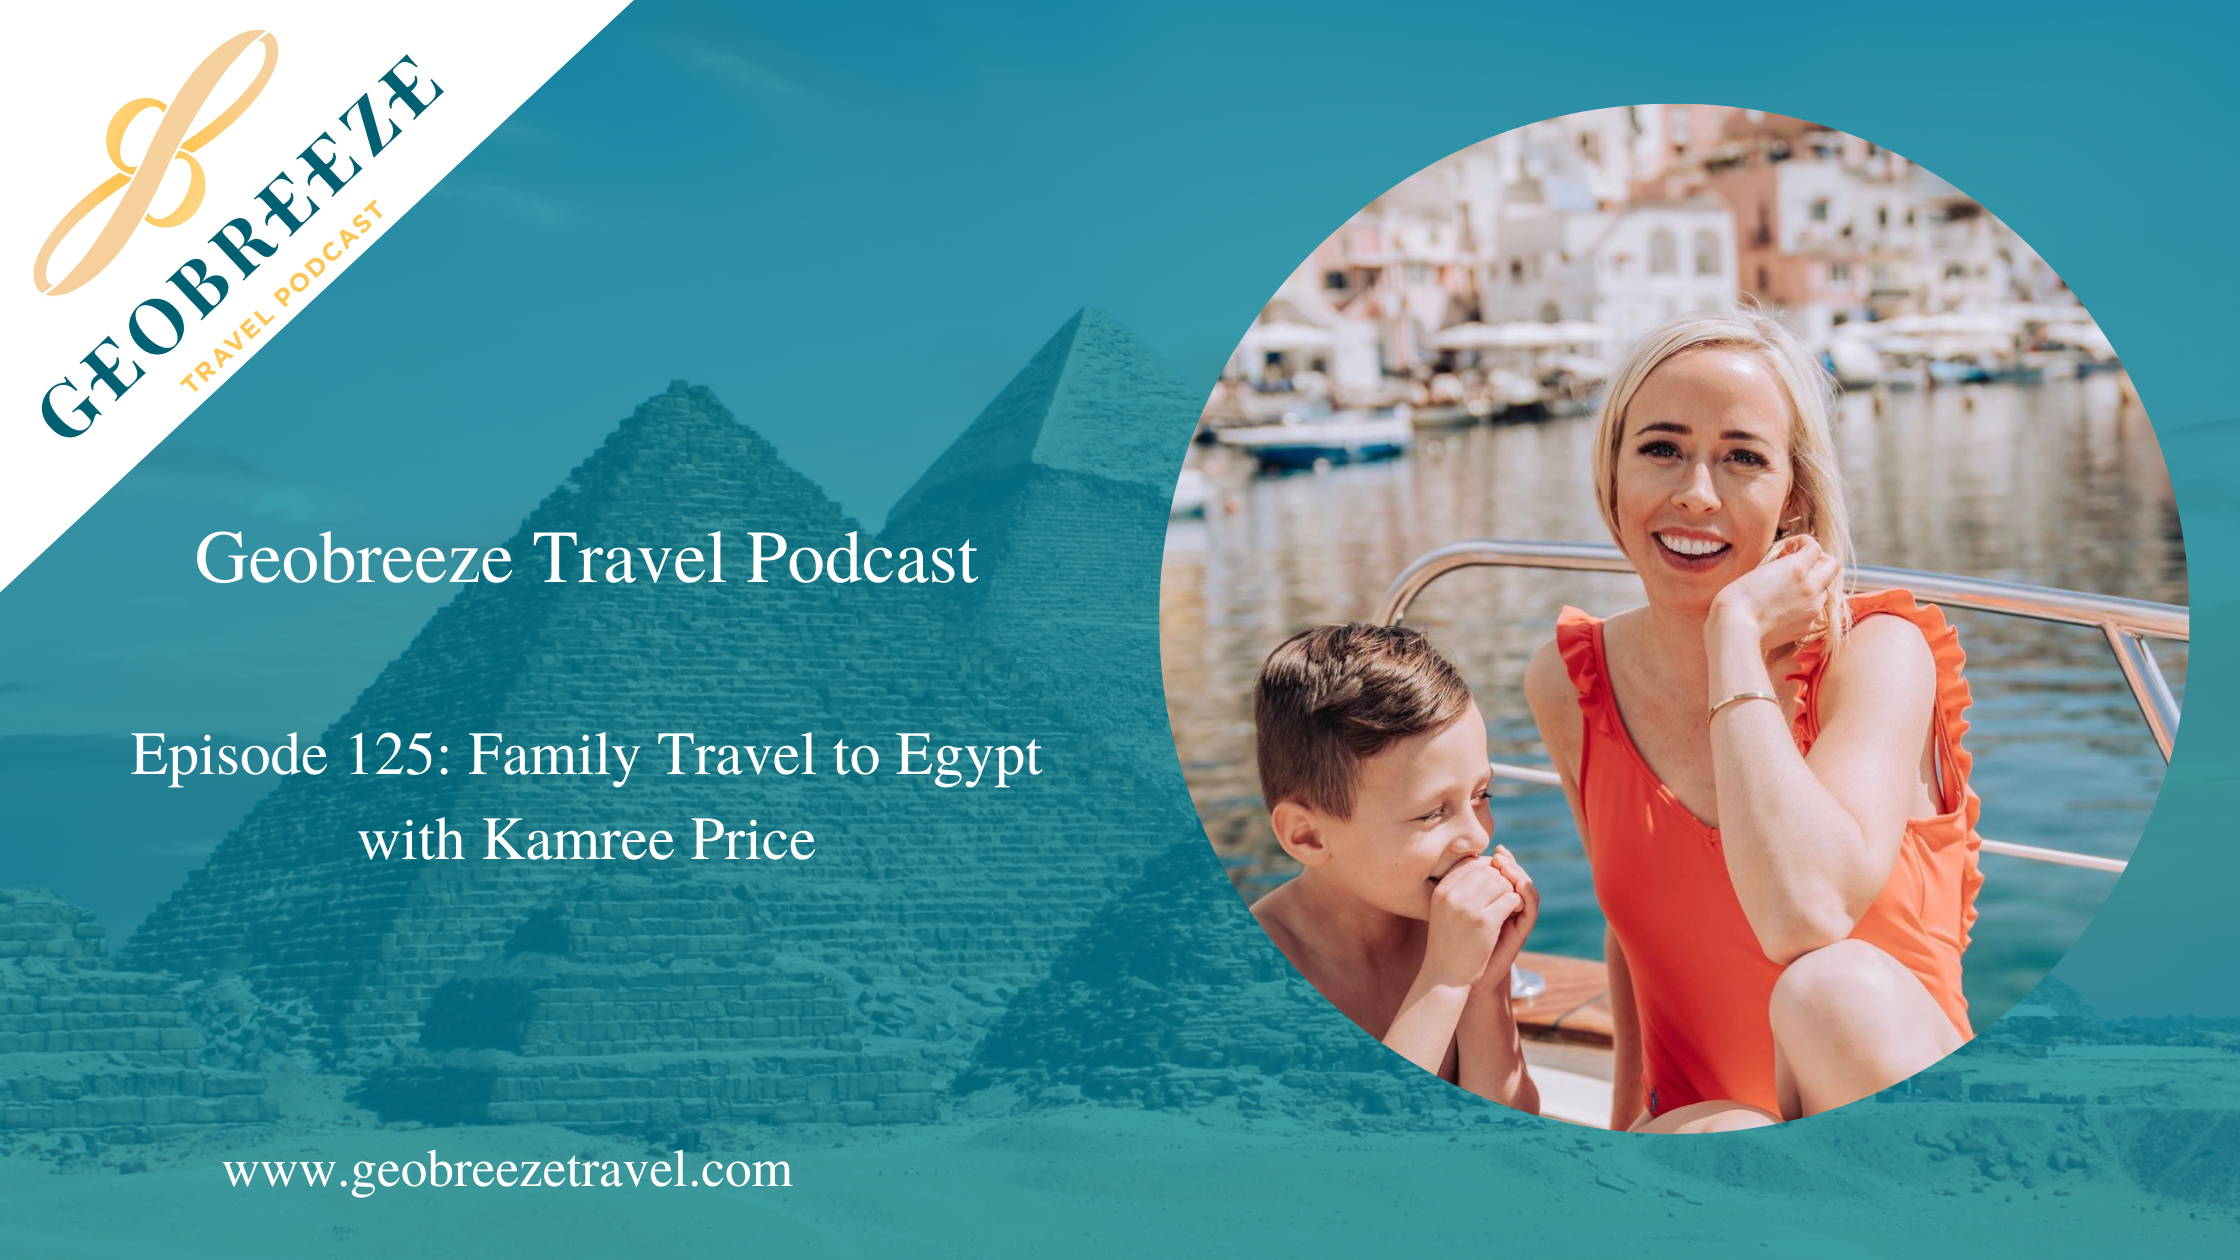 Episode 125: Family Travel to Egypt with Kamree Price